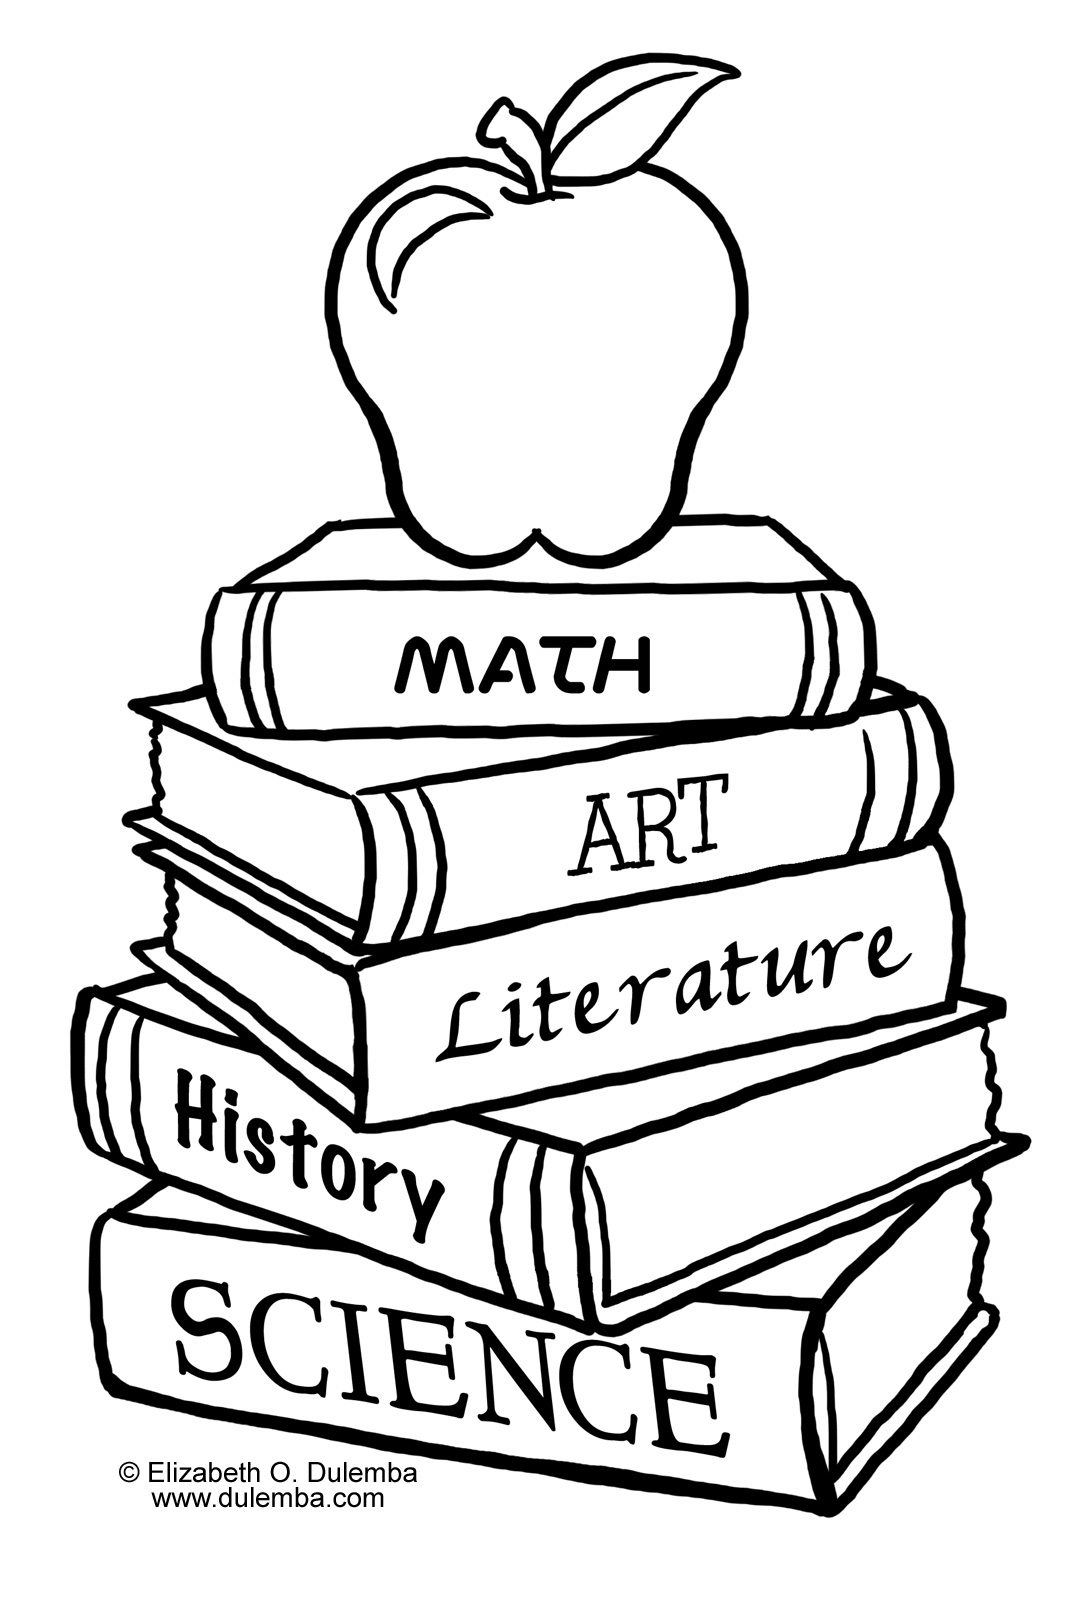  School House coloring pages, Coloring for kids, Booking